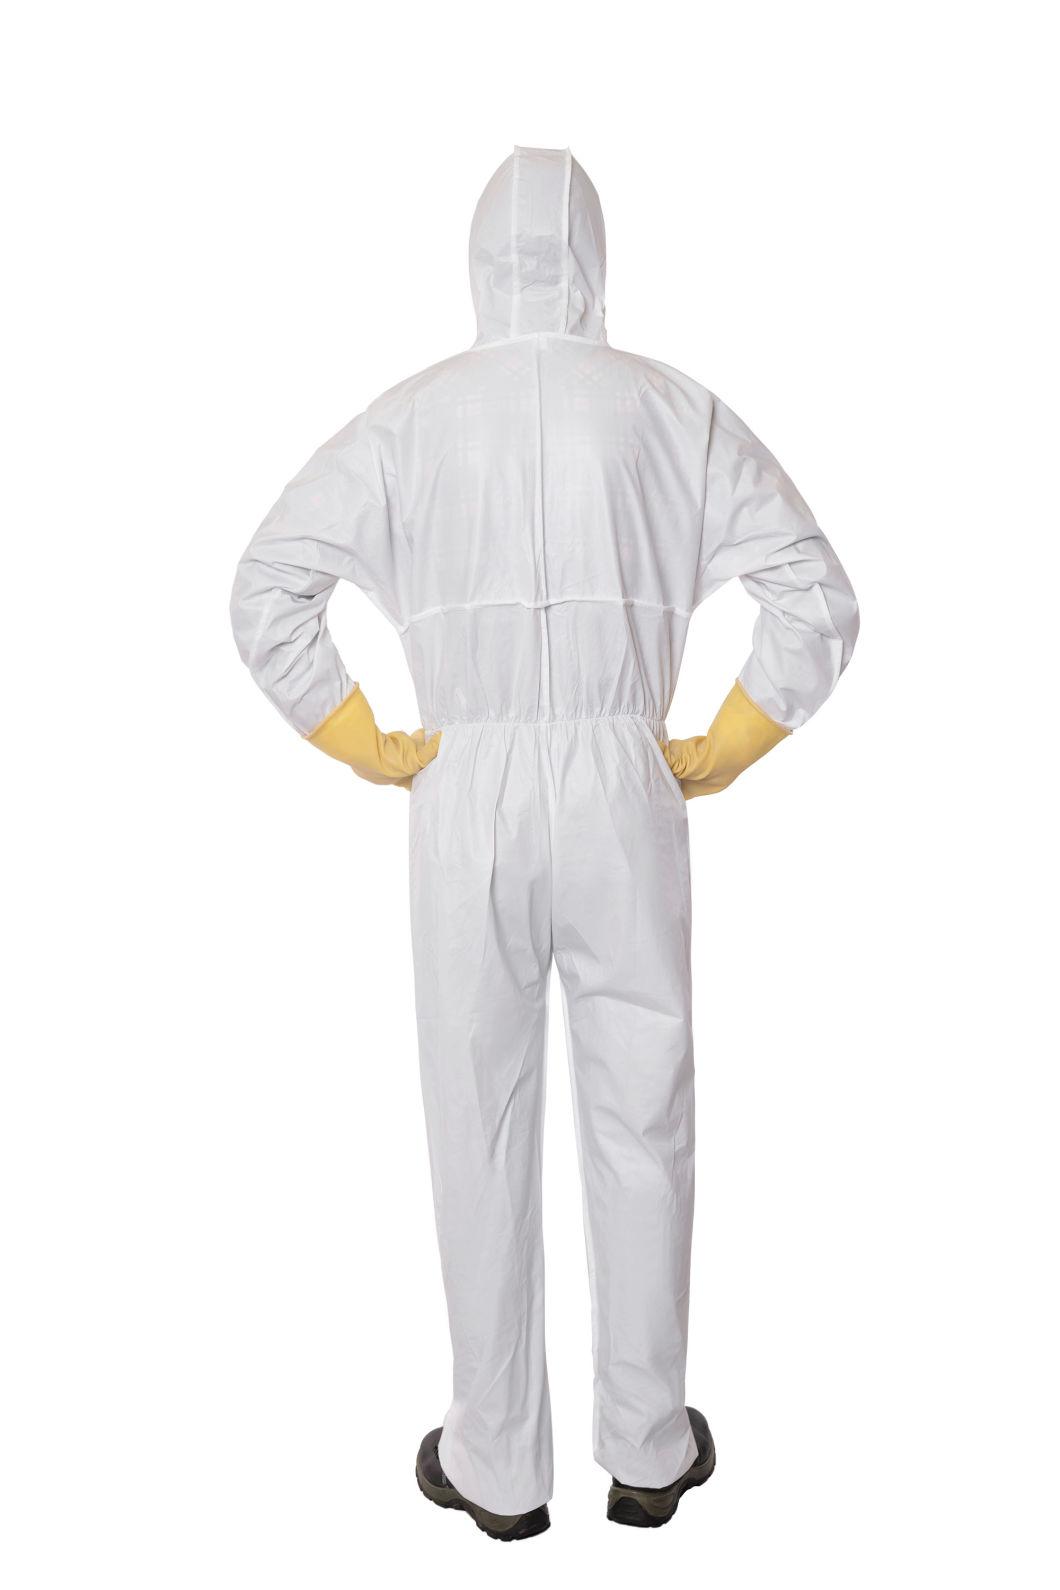 Protective Light Weight Disposable SMS Protective Safety Coverall Suits Protection Clothing